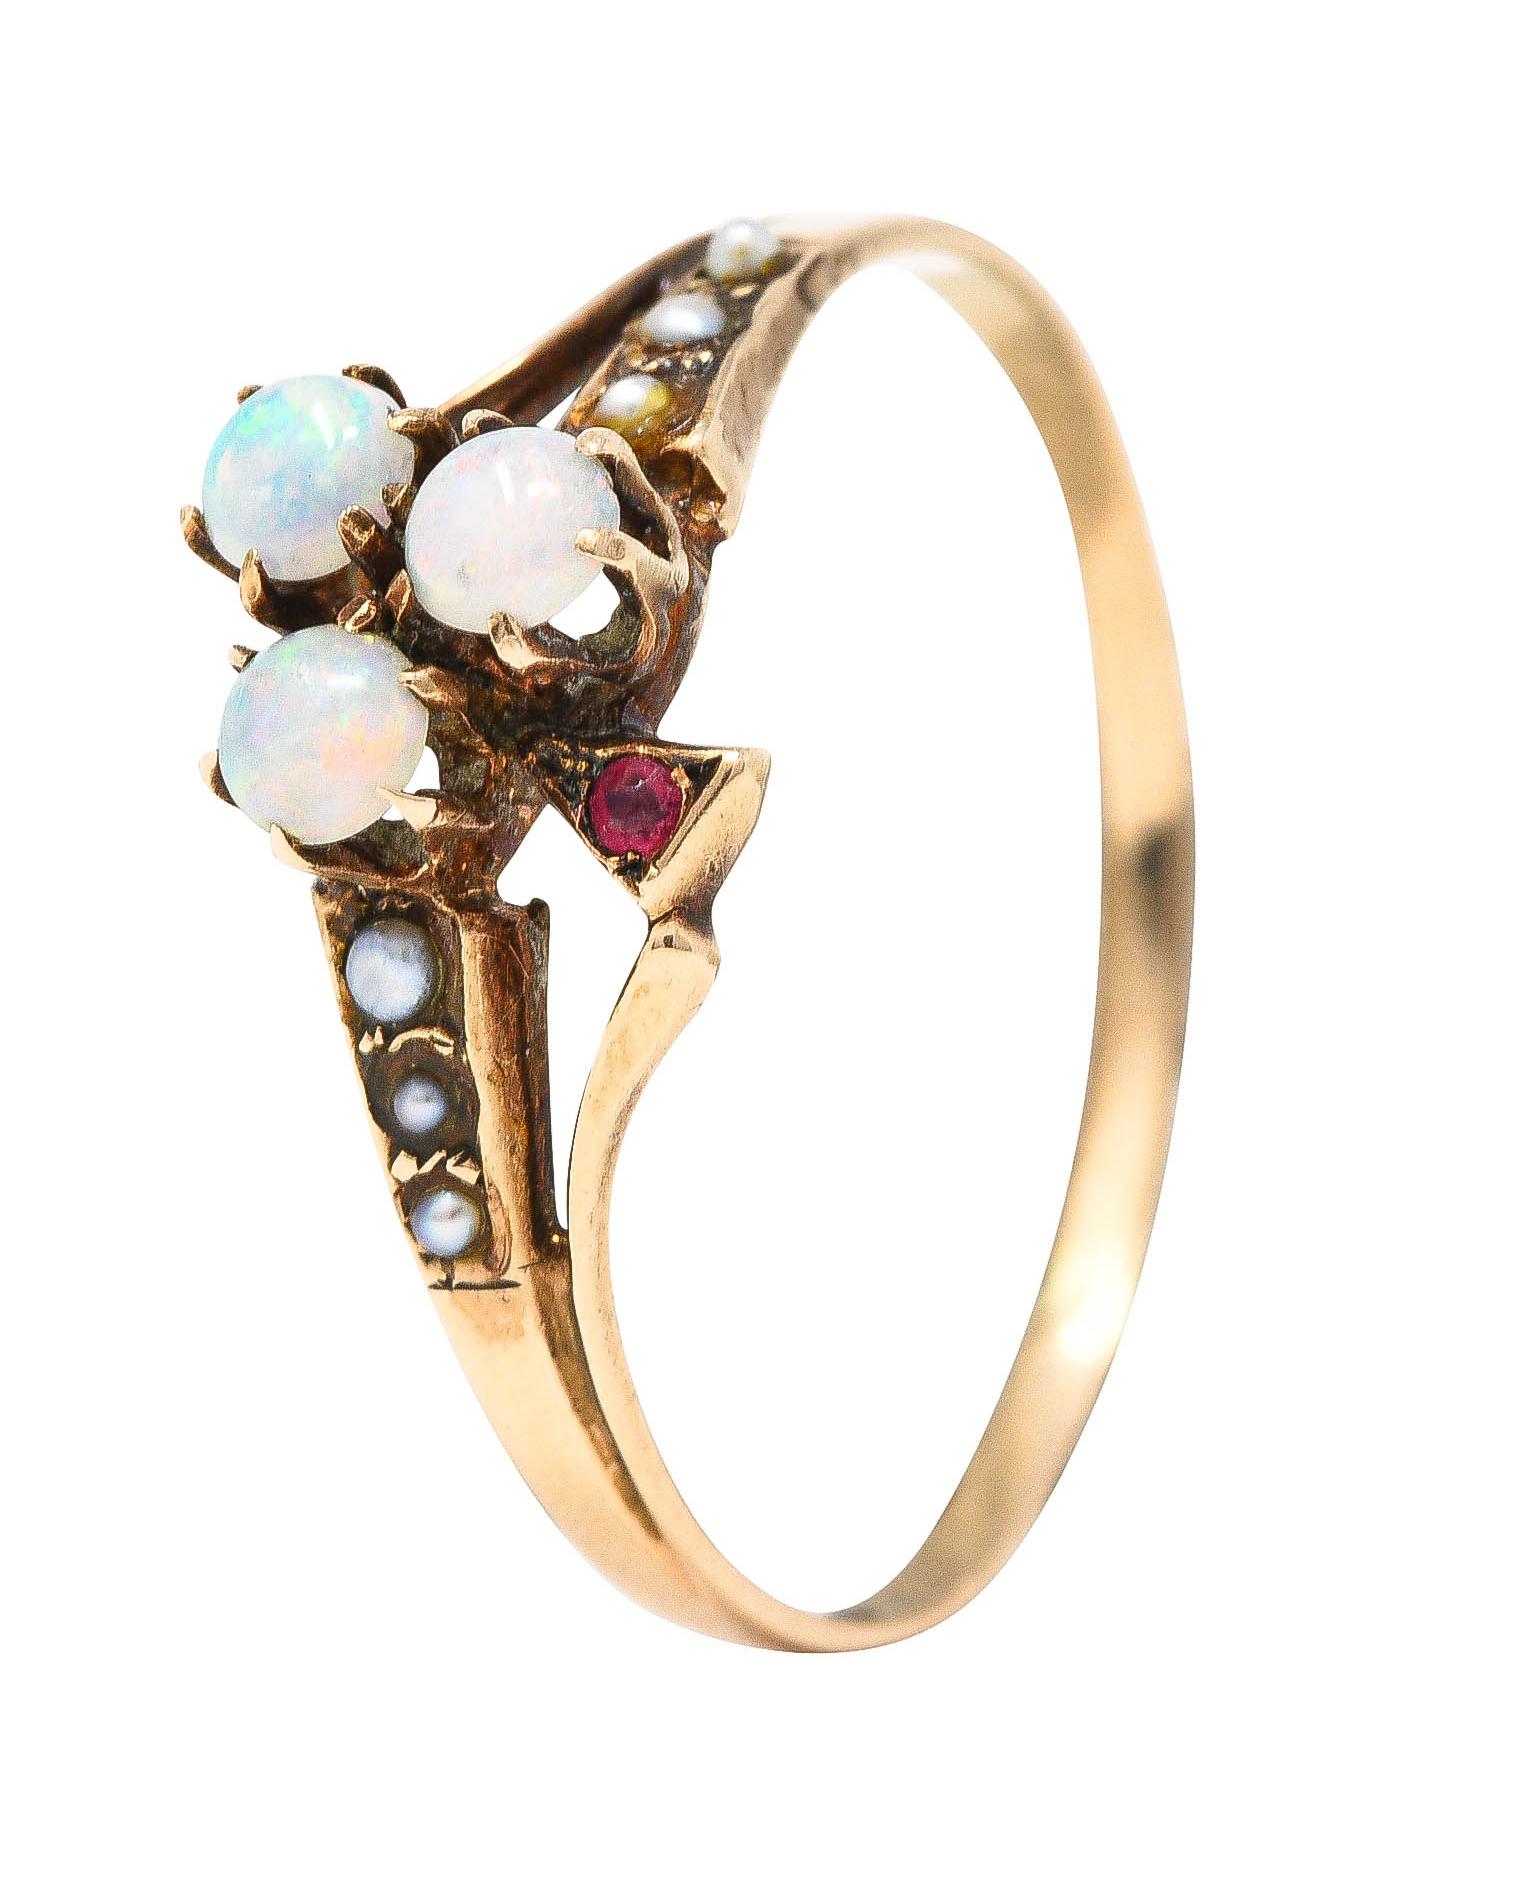 1890's Victorian Opal Ruby Seed Pearl 14 Karat Rose Gold Clover Ring 4